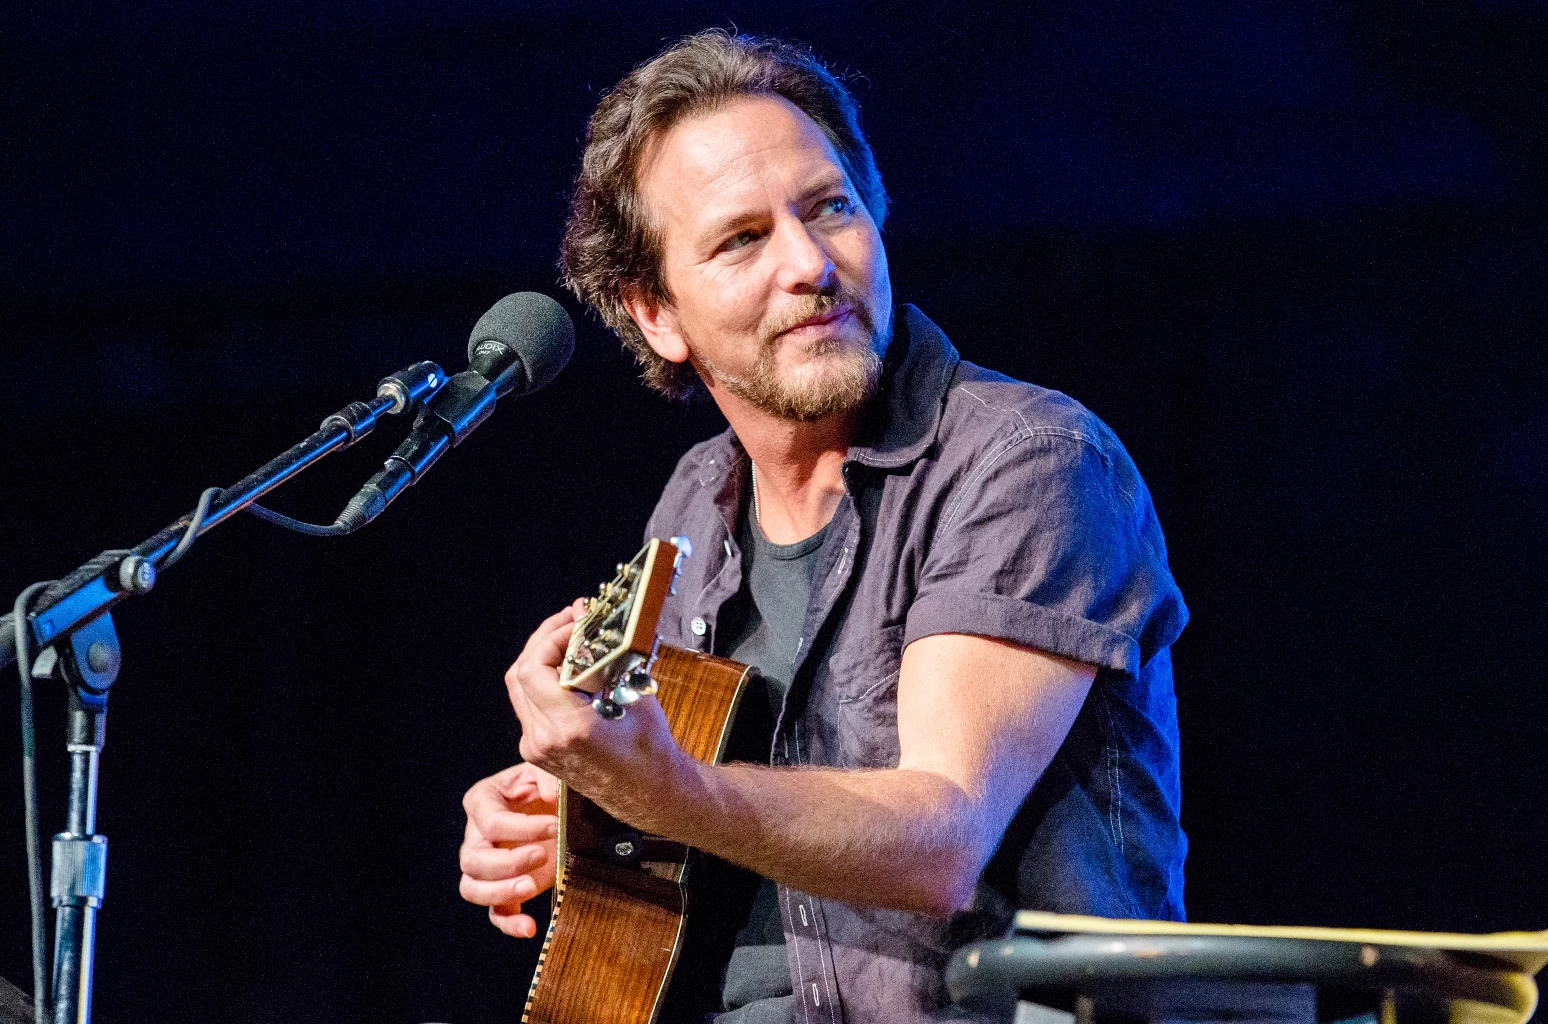 Eddie Vedder Or Stone Gossard Who Is The Richest Pearl Jam Member? See